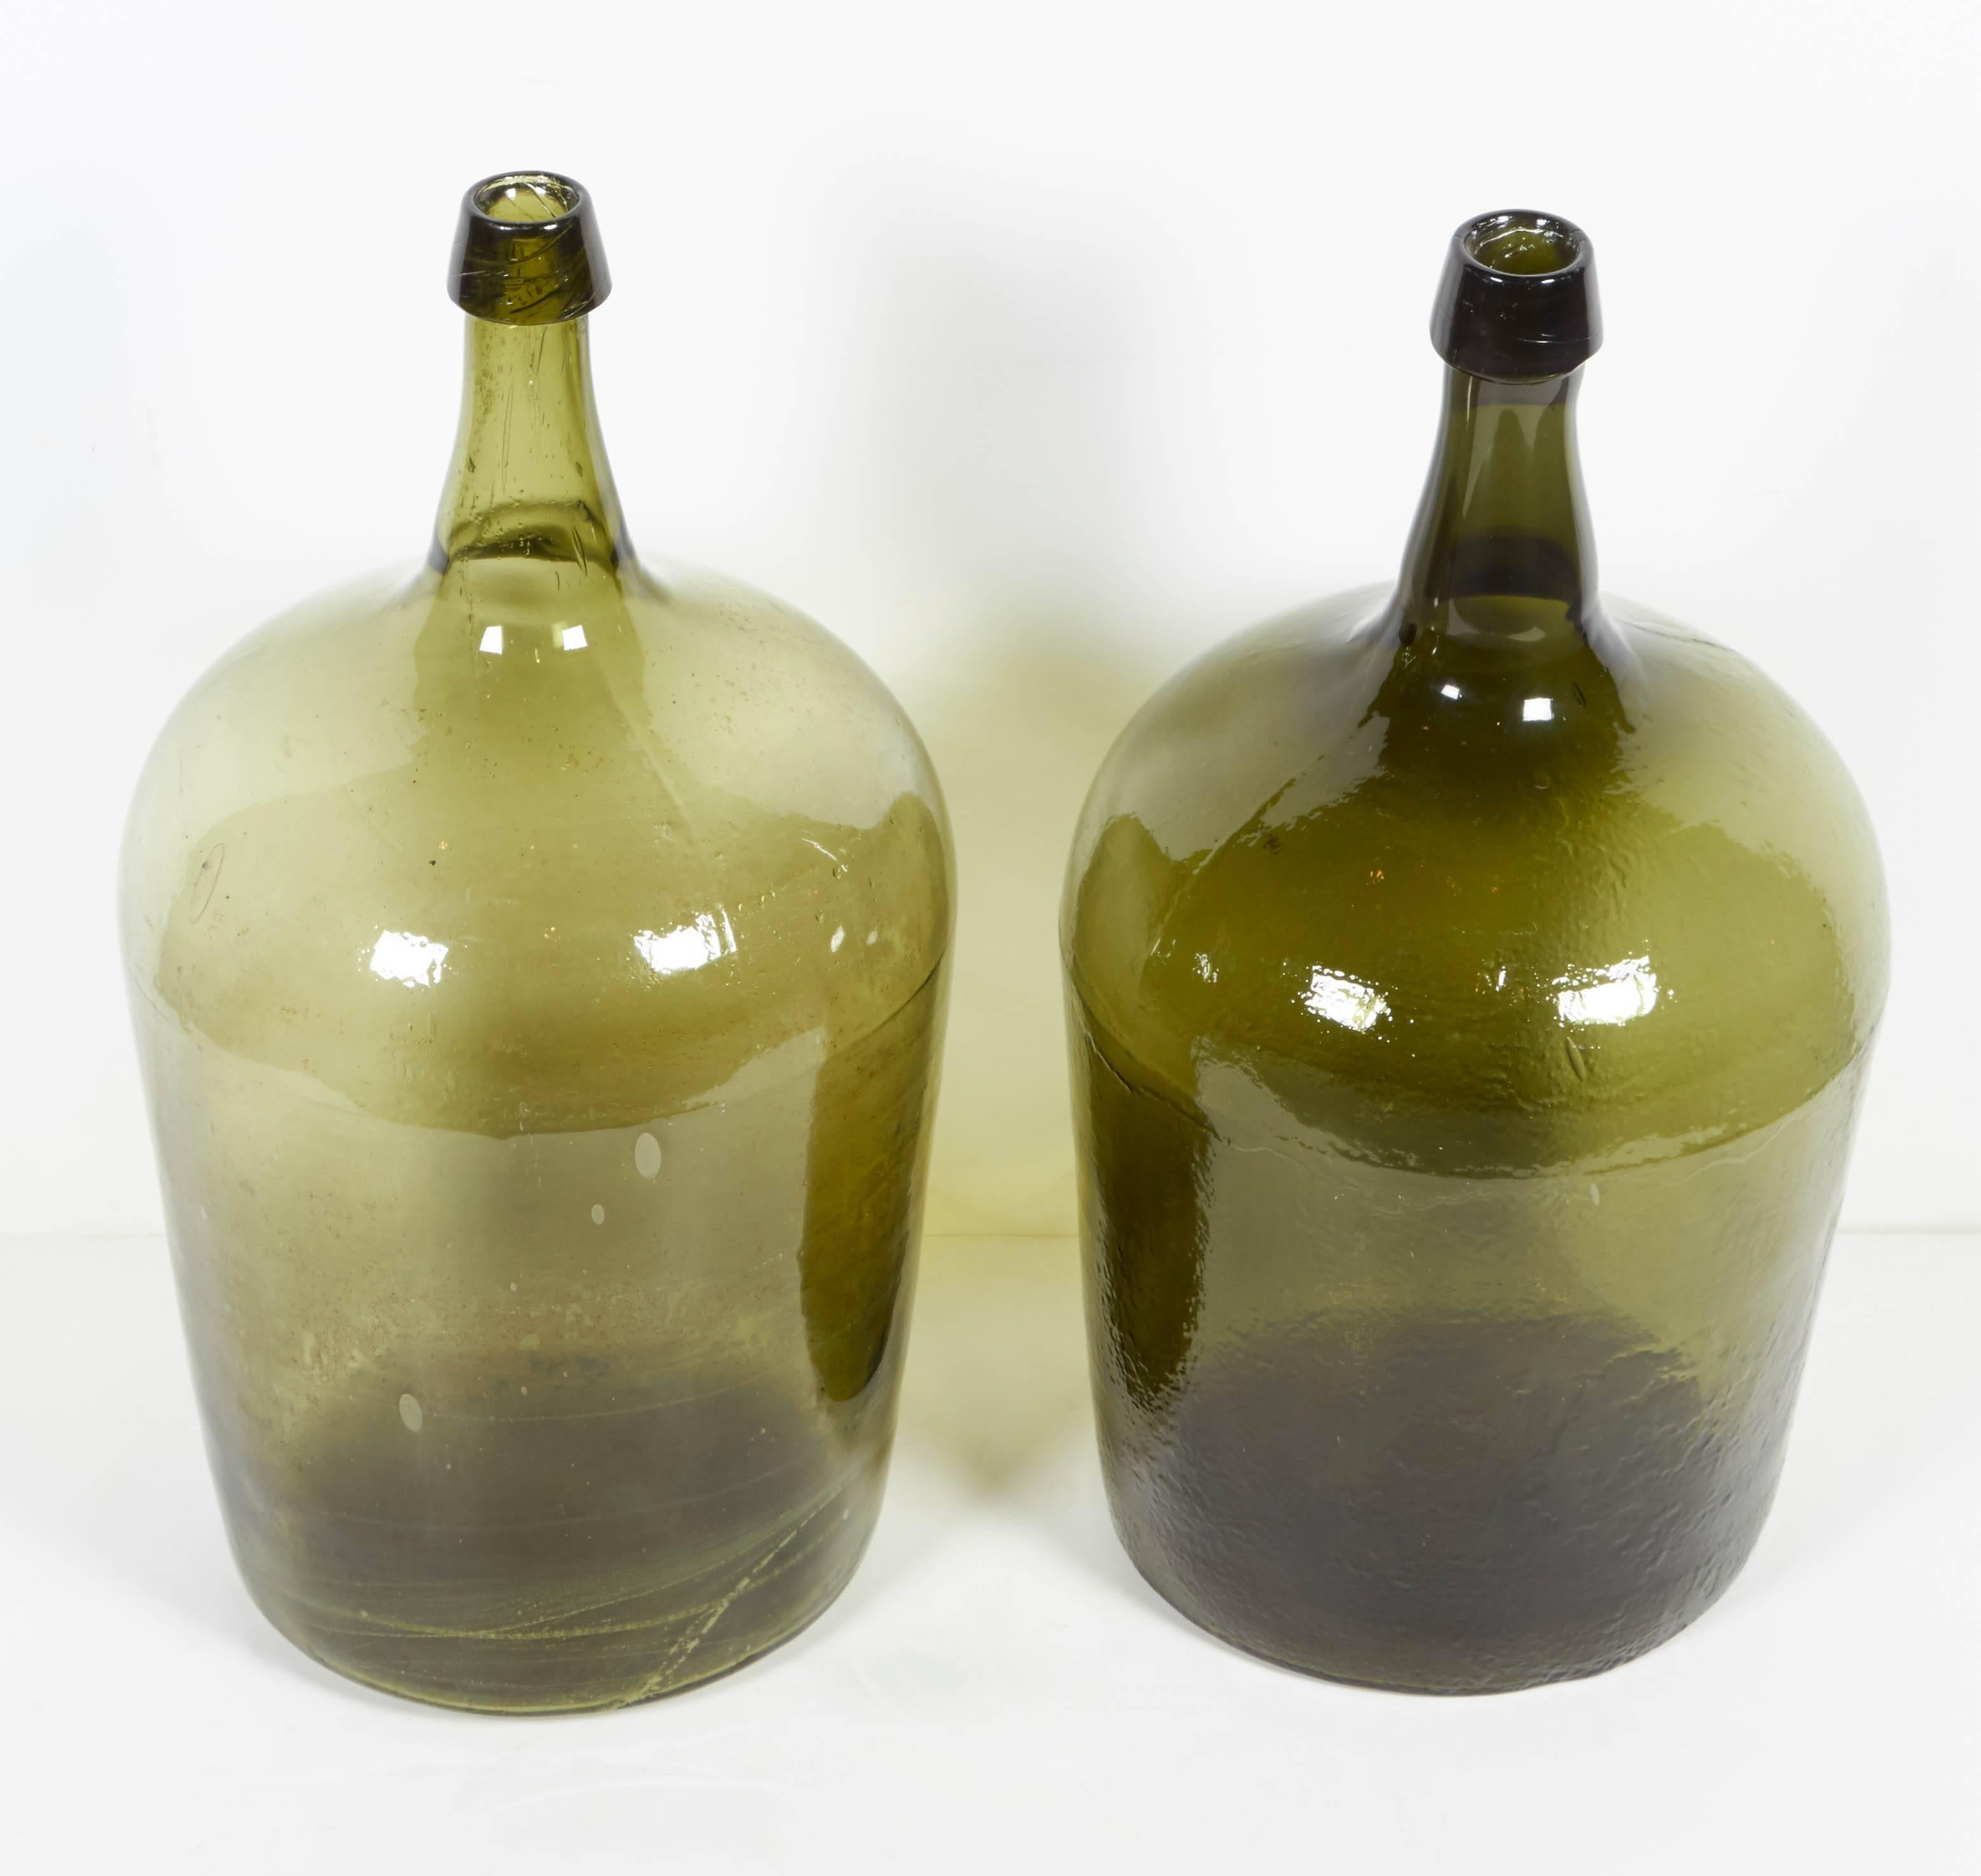 Two antique handblown glass demijohns from France with rough pontil bottoms. Each is beautifully shaped and distinctly colored, one with a wonderfully quirky tilt in the spout emphasizing it's handmade origins. 
GL218.
